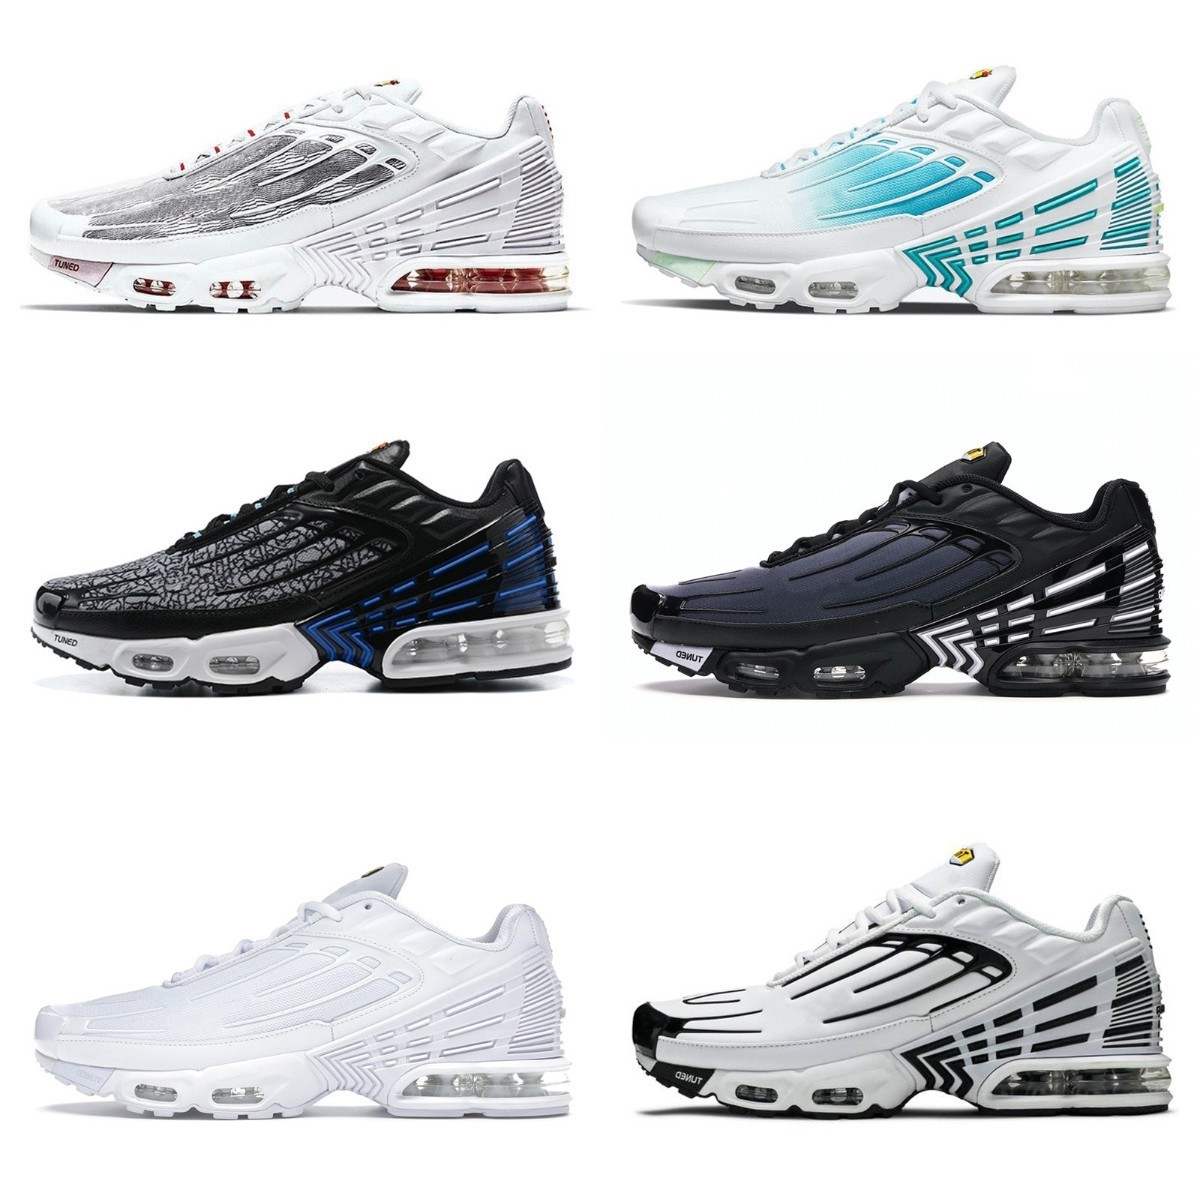 

Trainers Tn Plus 3 Tuned Mens Sports Shoes Laser Black White Aquamarine Leather Tns Requin Obsidian Hyper Violet Deep Parachute Ghost Green Triple Brand Sneakers, Please contact us